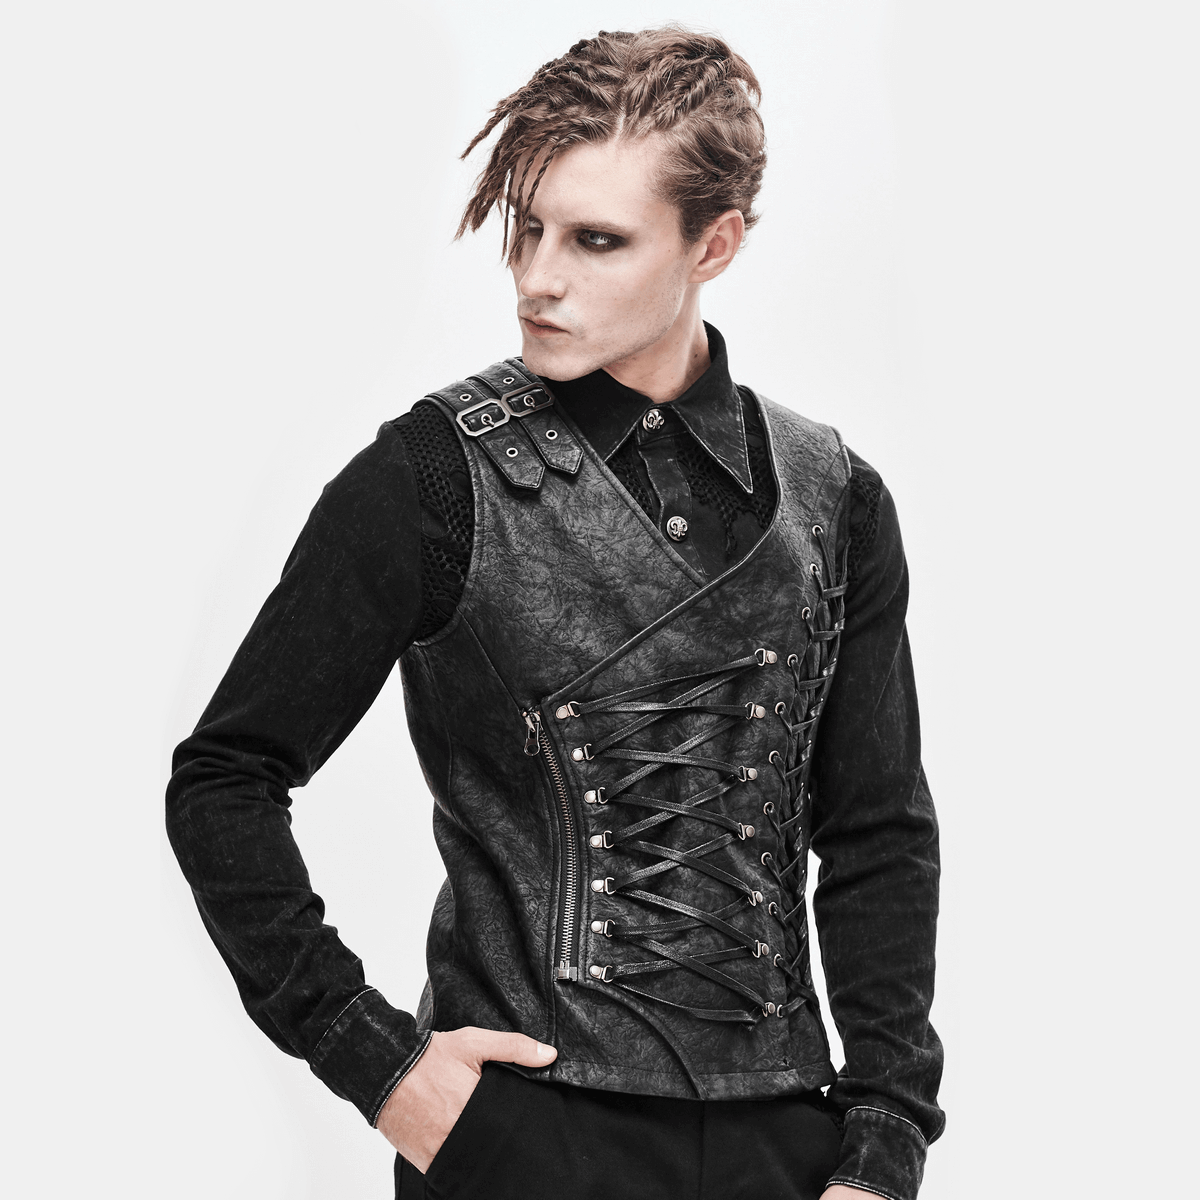 Let's check our Men's gothic style clothing: vests & waistcoats collection!